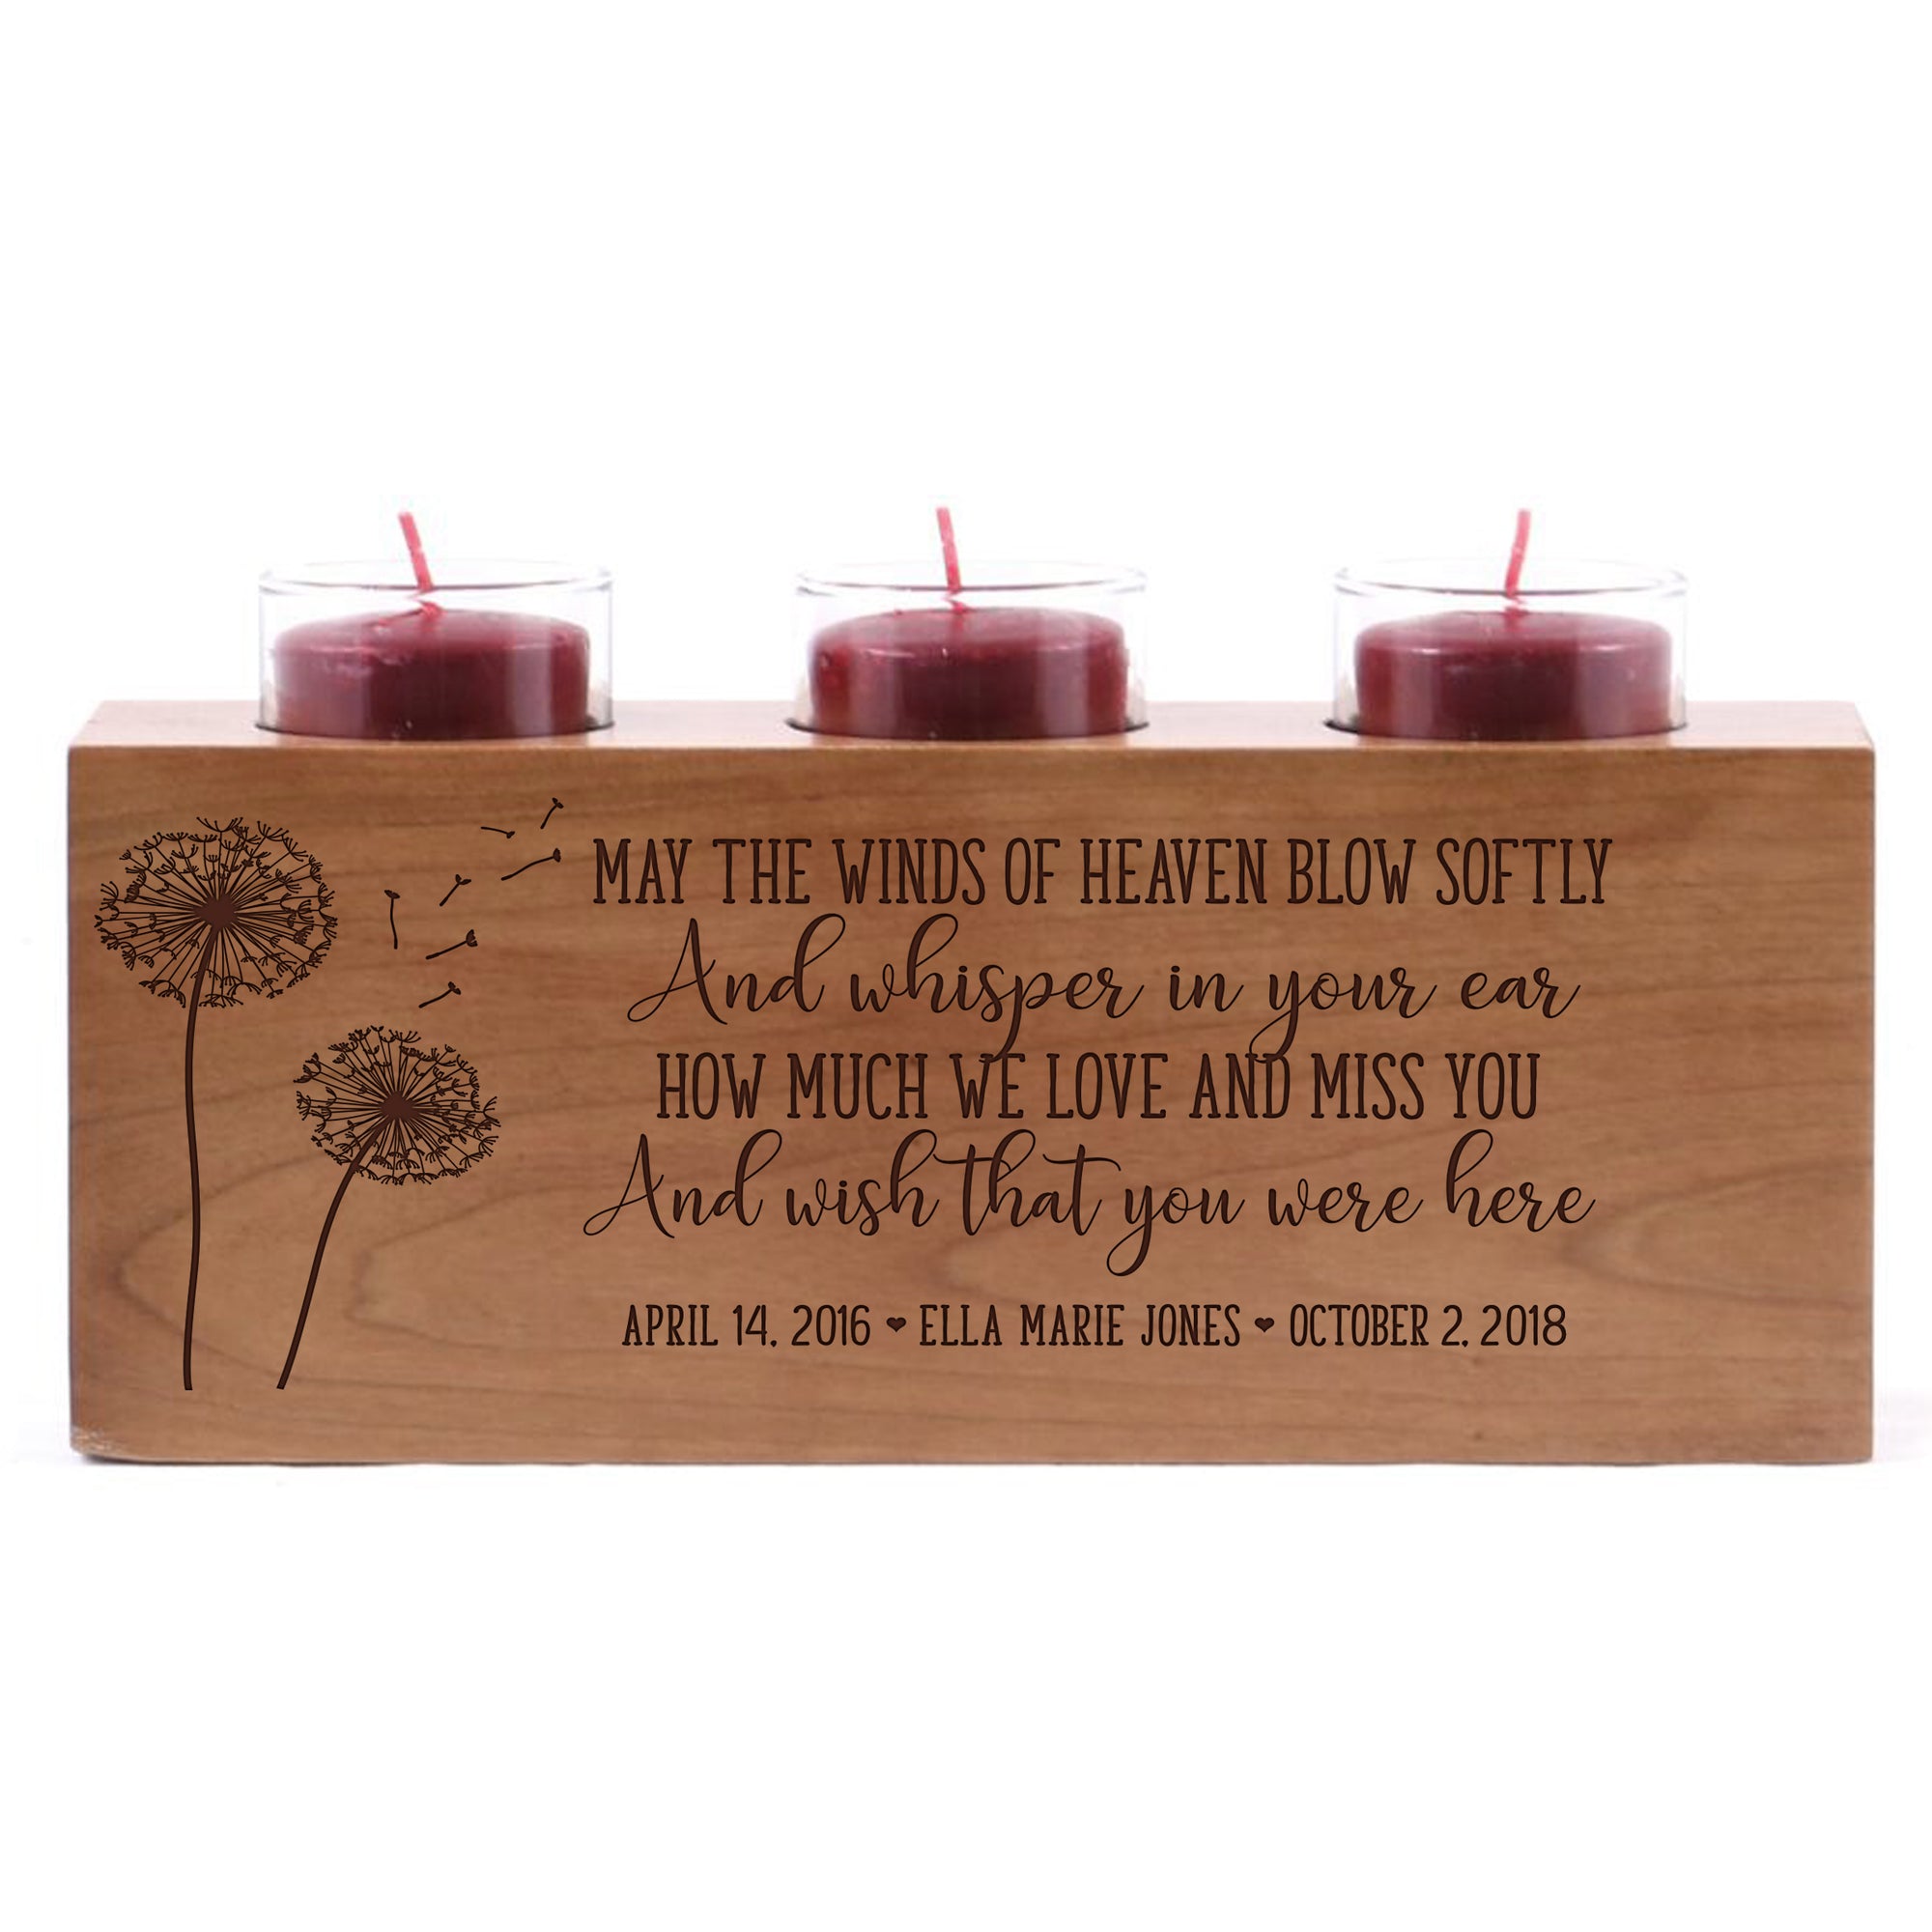 Personalized Baby Memorial sympathy candle holder custom engraved wood keepsake ideas for Loved One 10" L x 4" H by LifeSong Milestones